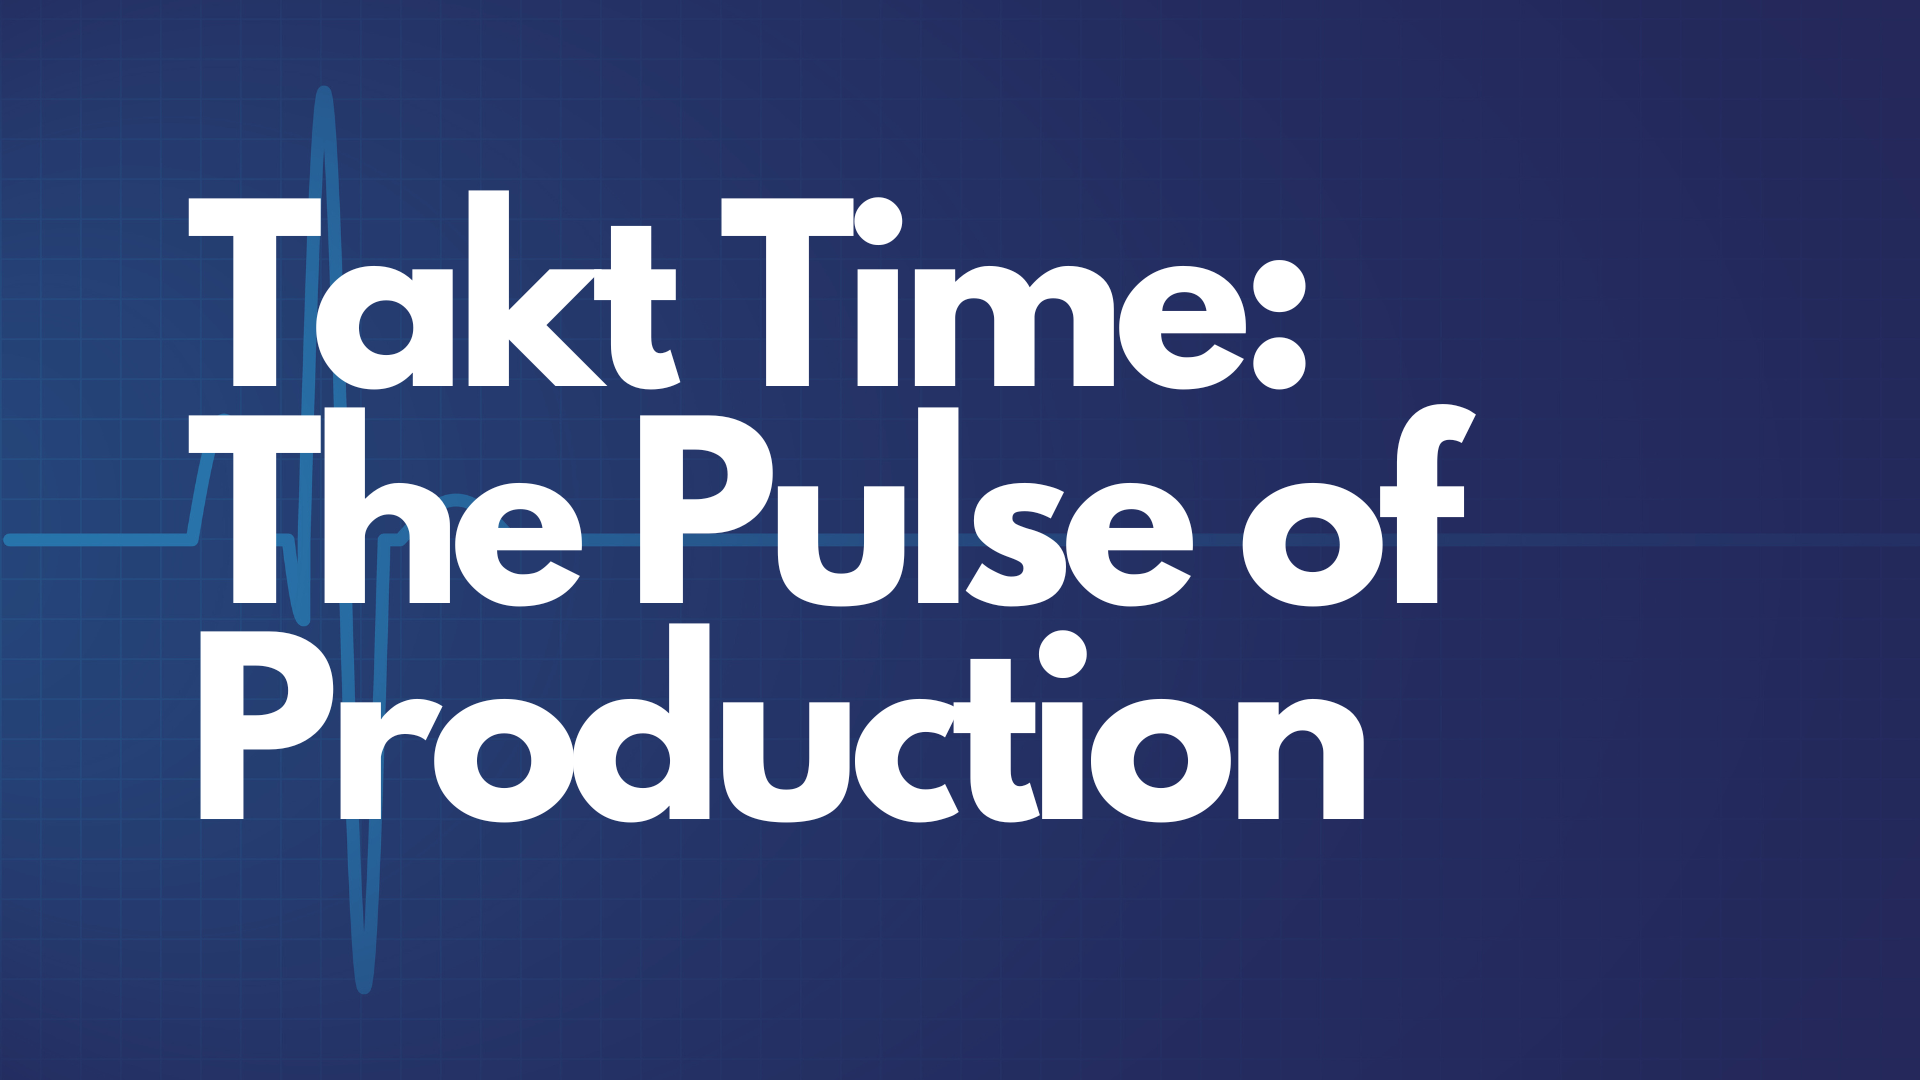 Takt Time: The Pulse of Production